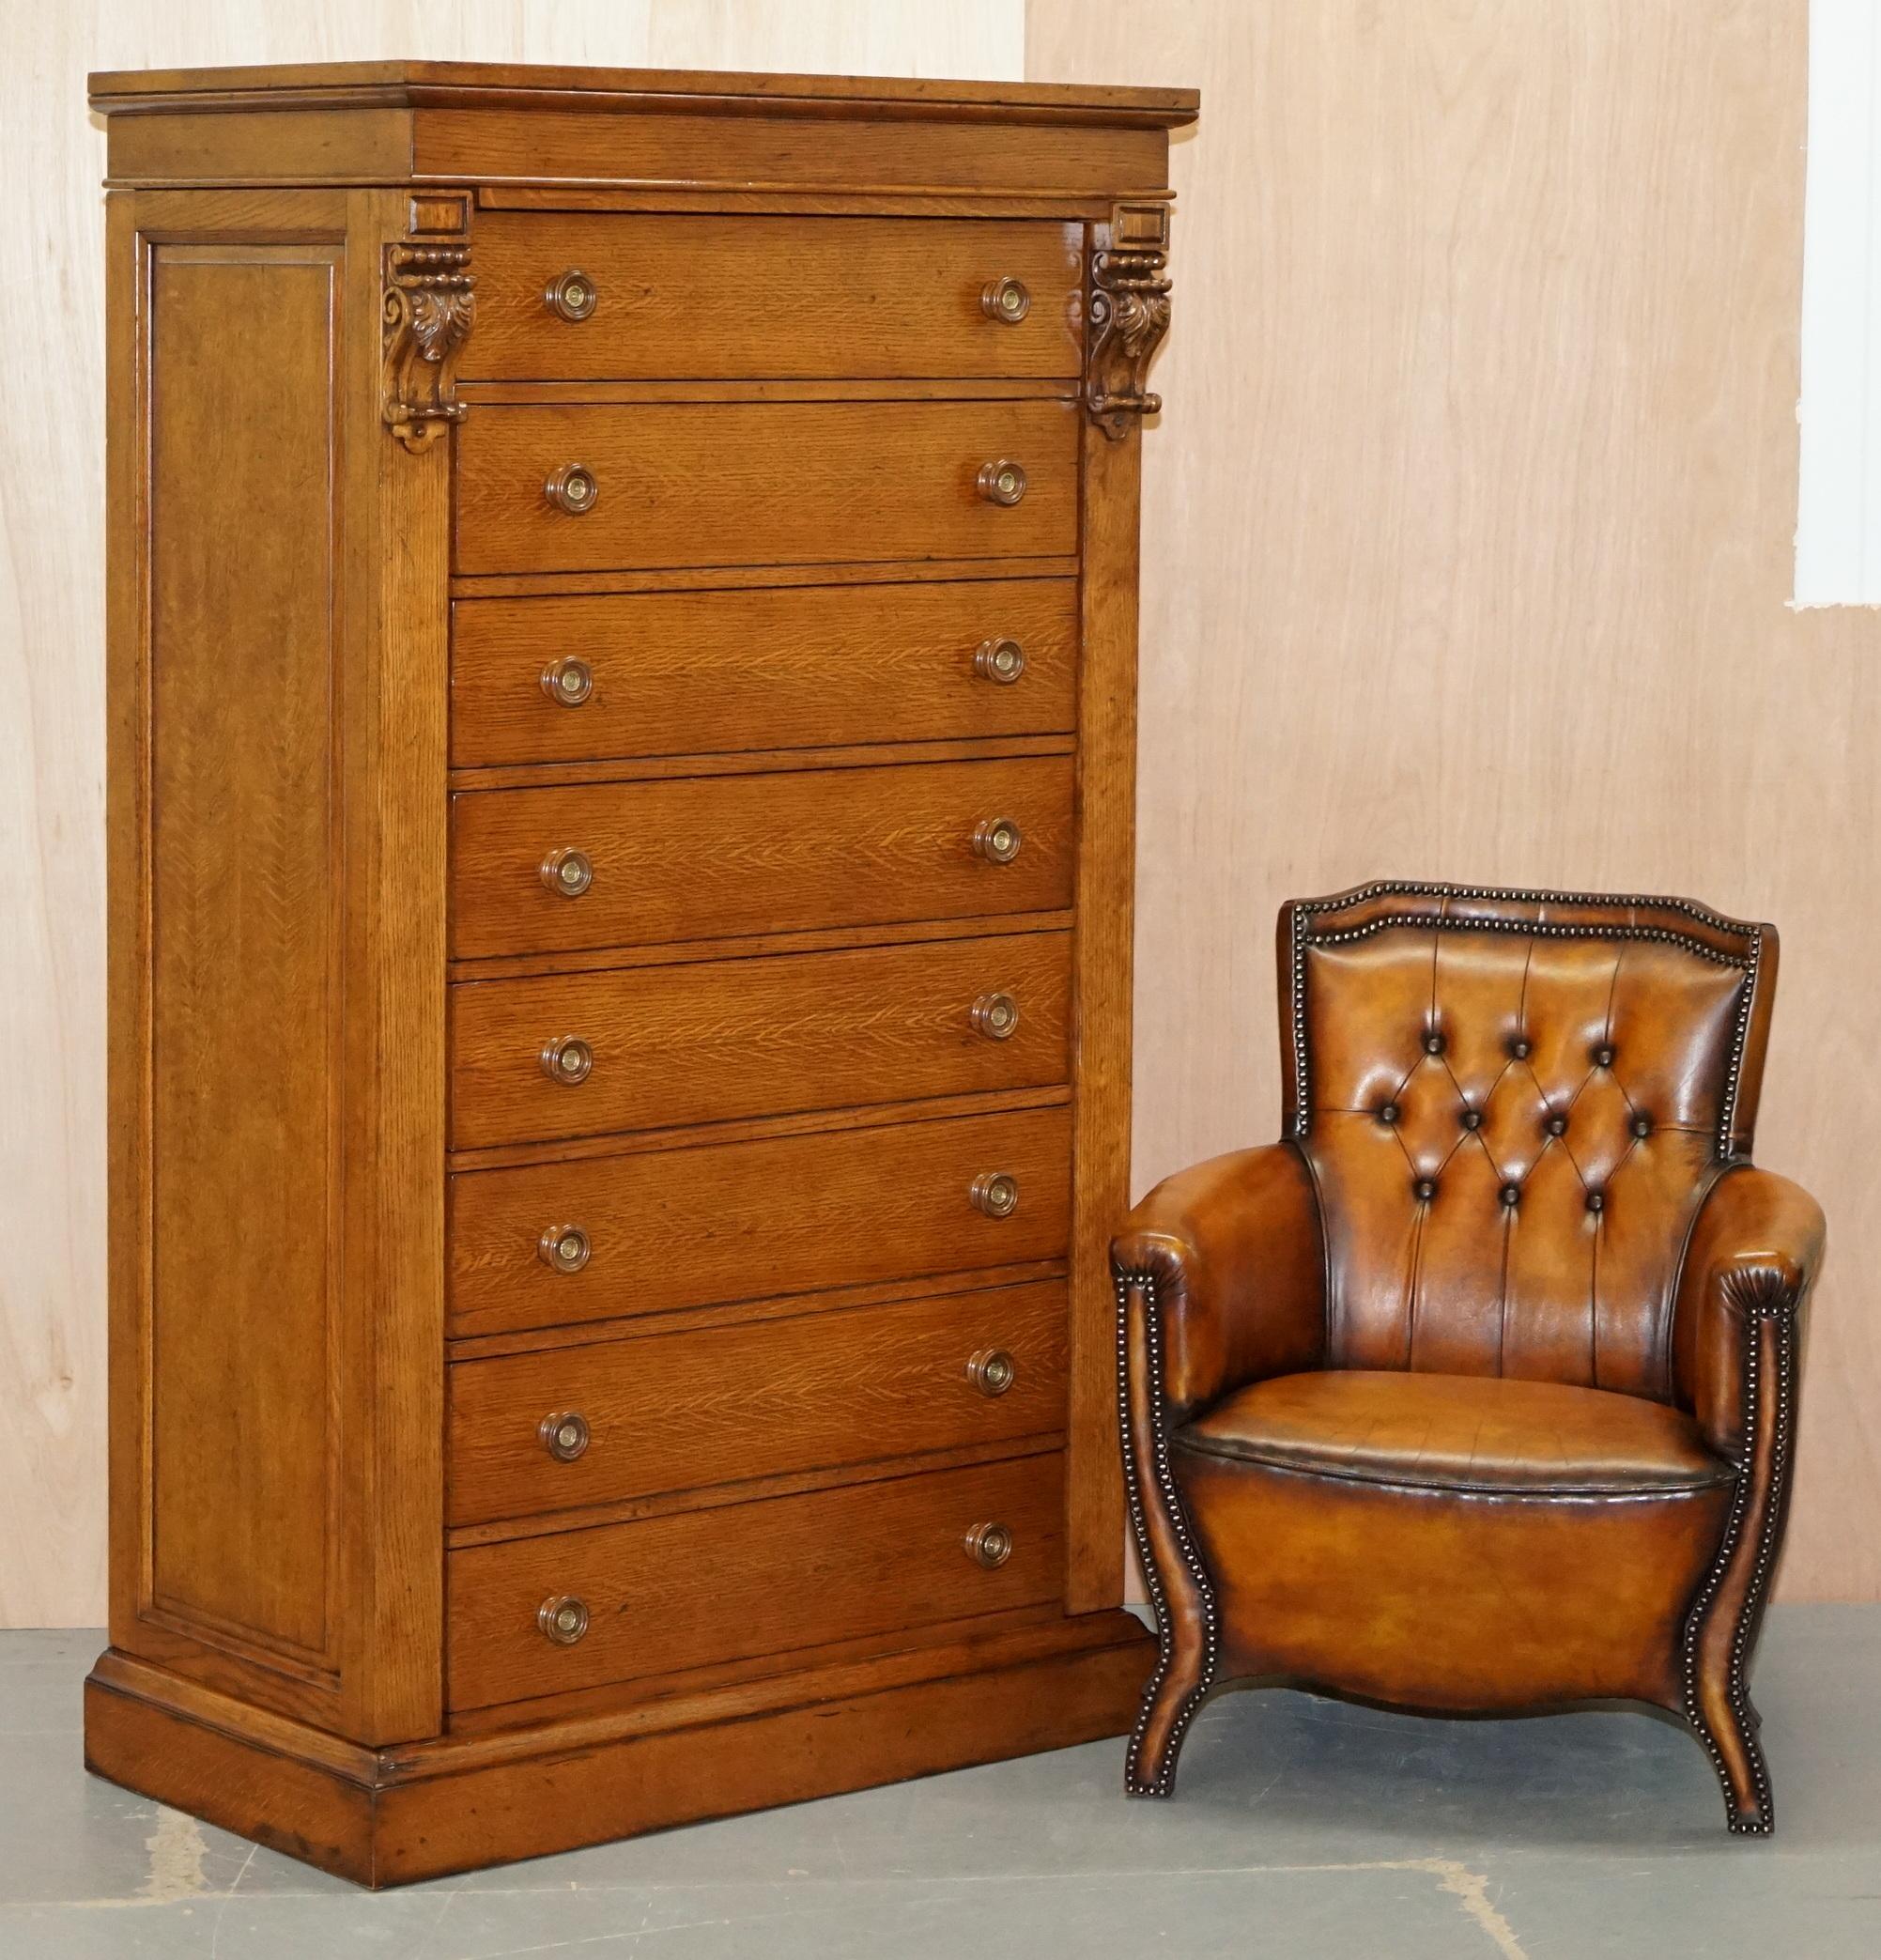 We are delighted to offer for sale this stunning Ralph Lauren Pollard oak chest of drawers tallboy Gentlemans closet with side mirros RRP £9999

This piece is made from solid Pollard oak which is very very heavy, the drawers operate as they should